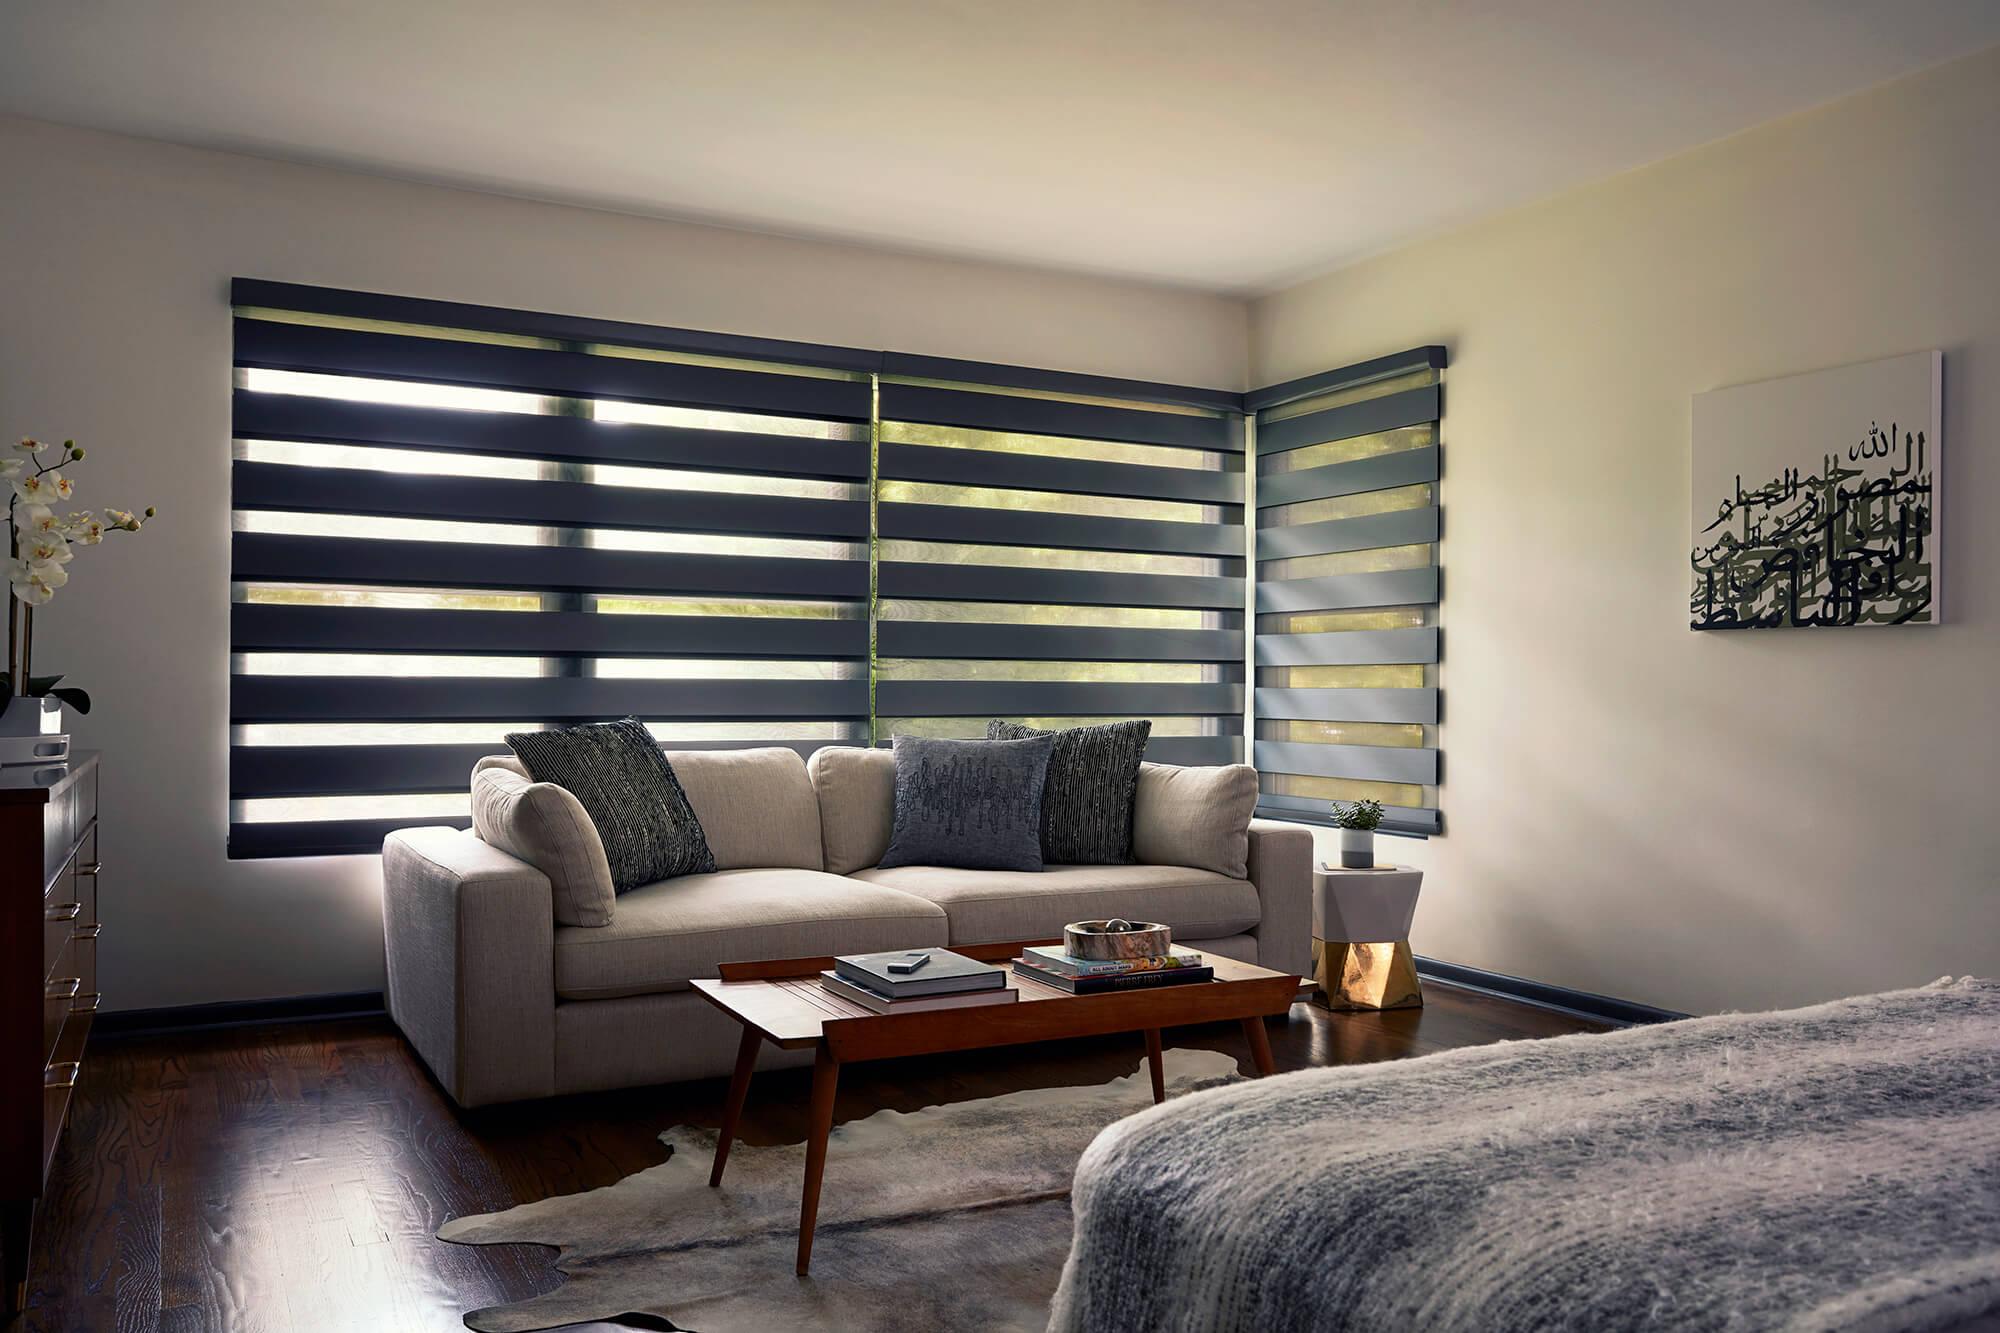 A spacious bedroom features a large window covered with black cascade sheer shades.